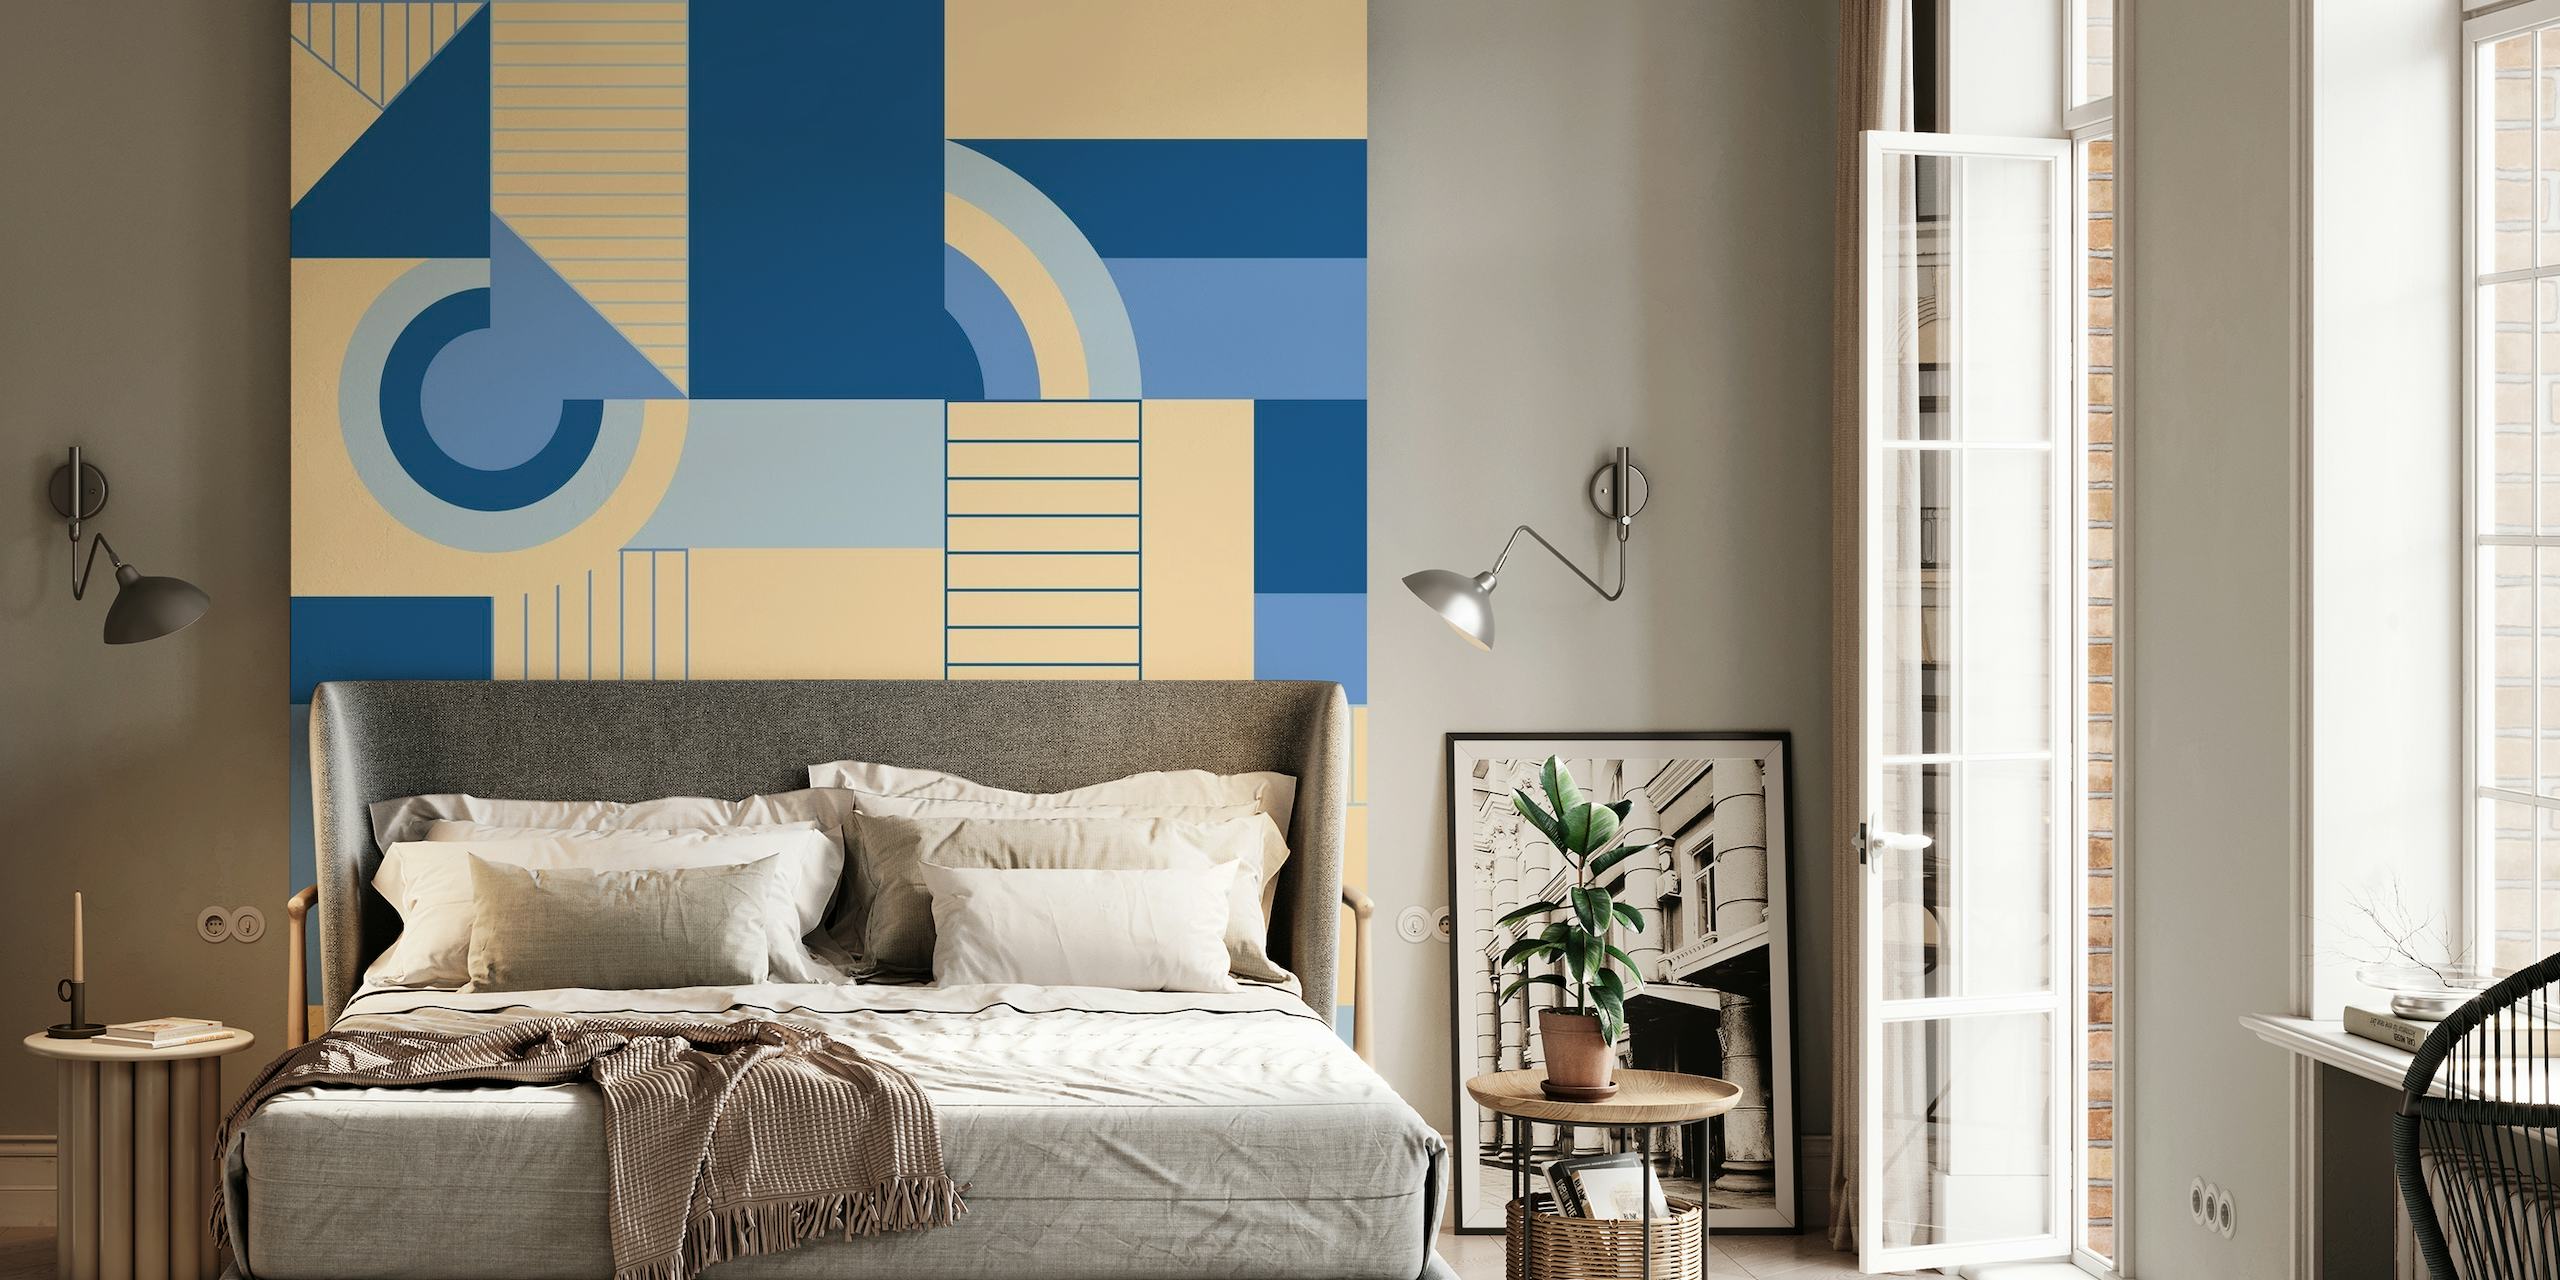 Abstract geometric wall mural in calming shades of blue and neutral tones, named 'Calming Blocks'